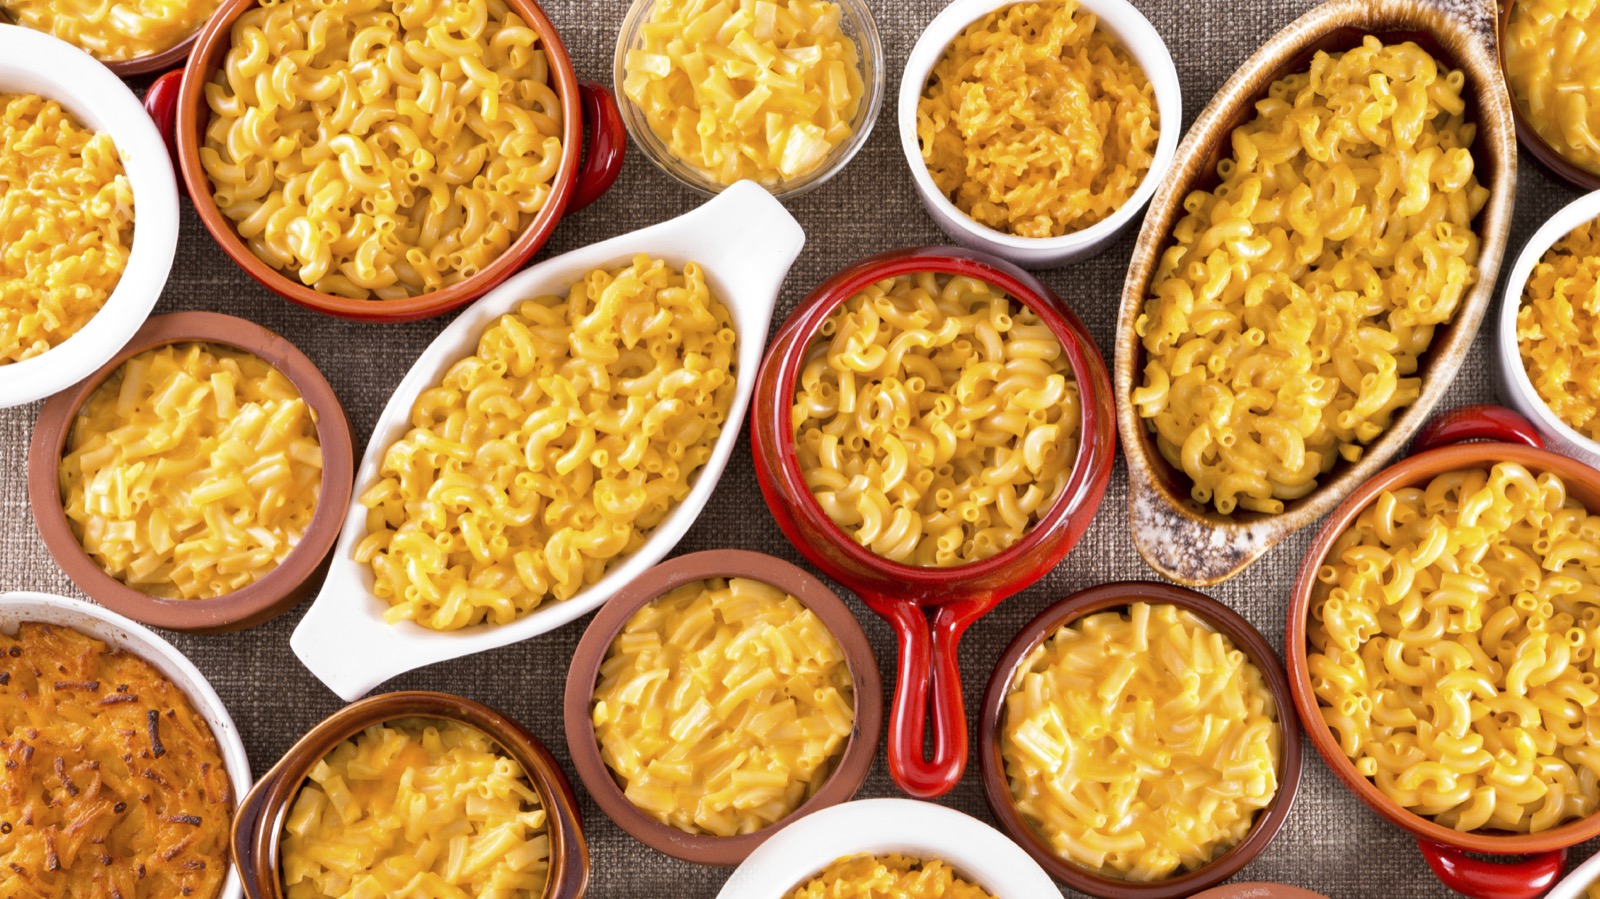 You got: Comfort Food Feast! What Should You Order for Dinner Tonight?